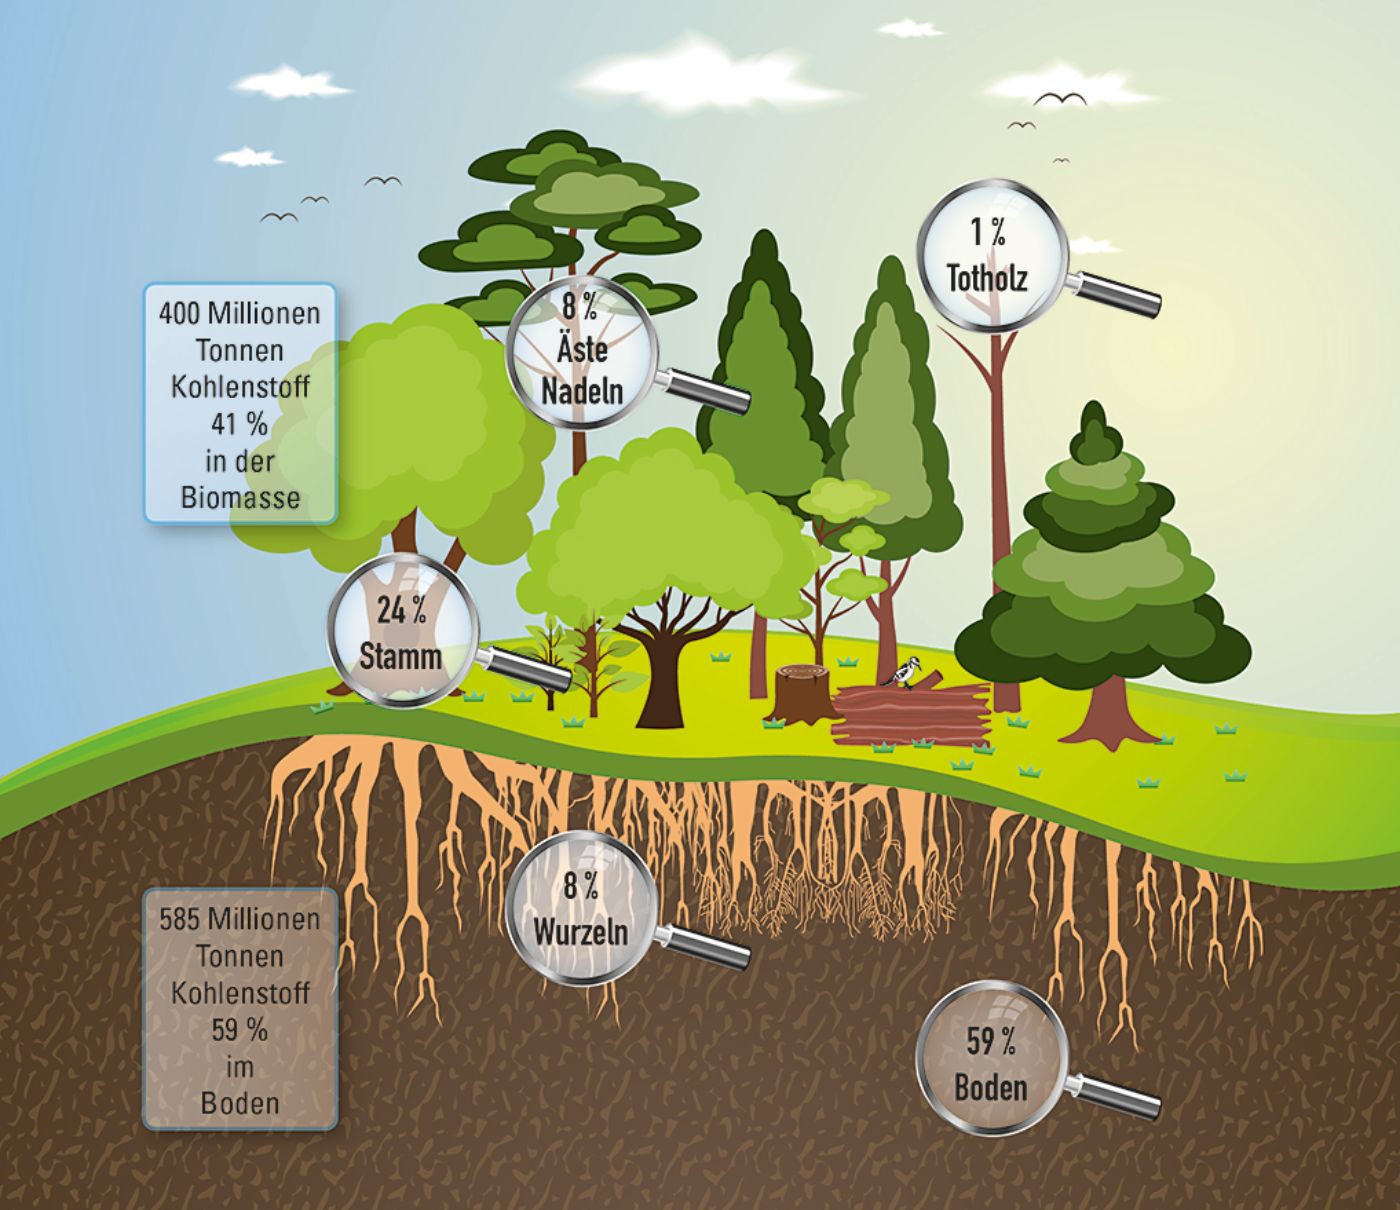 Graphic about stored carbon in the forest